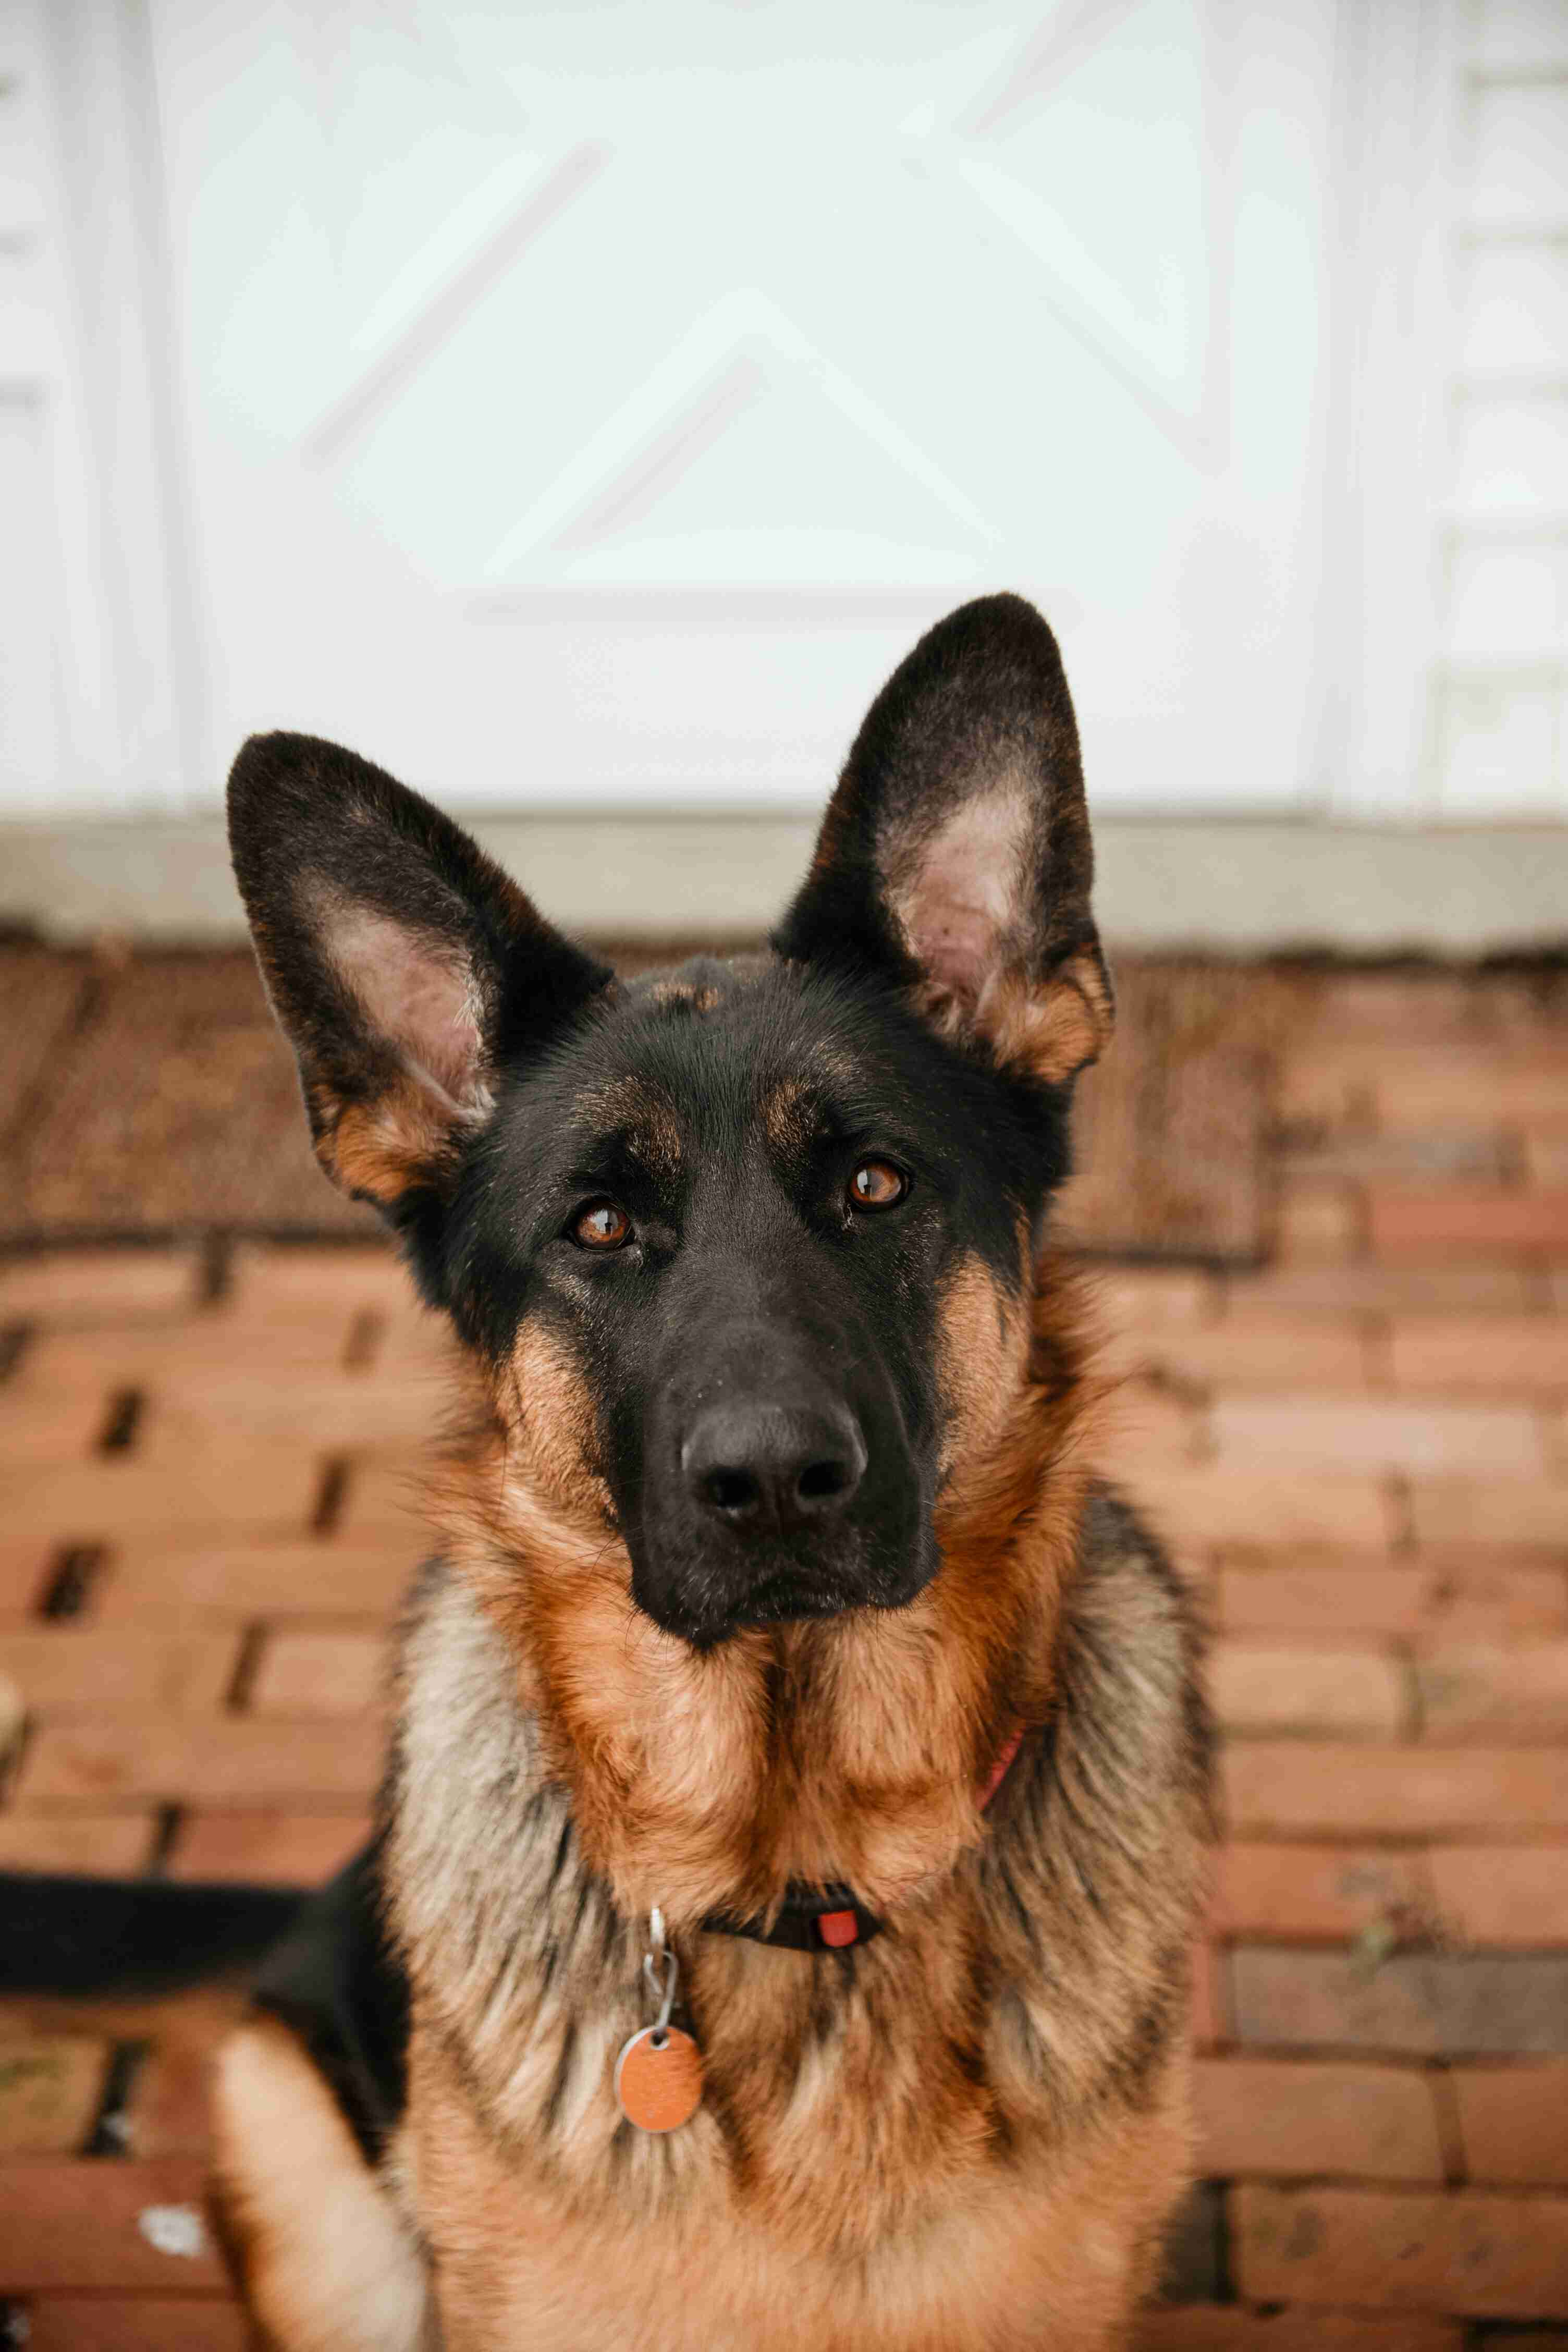 How can I prevent my German Shepherd from developing thyroid problems?